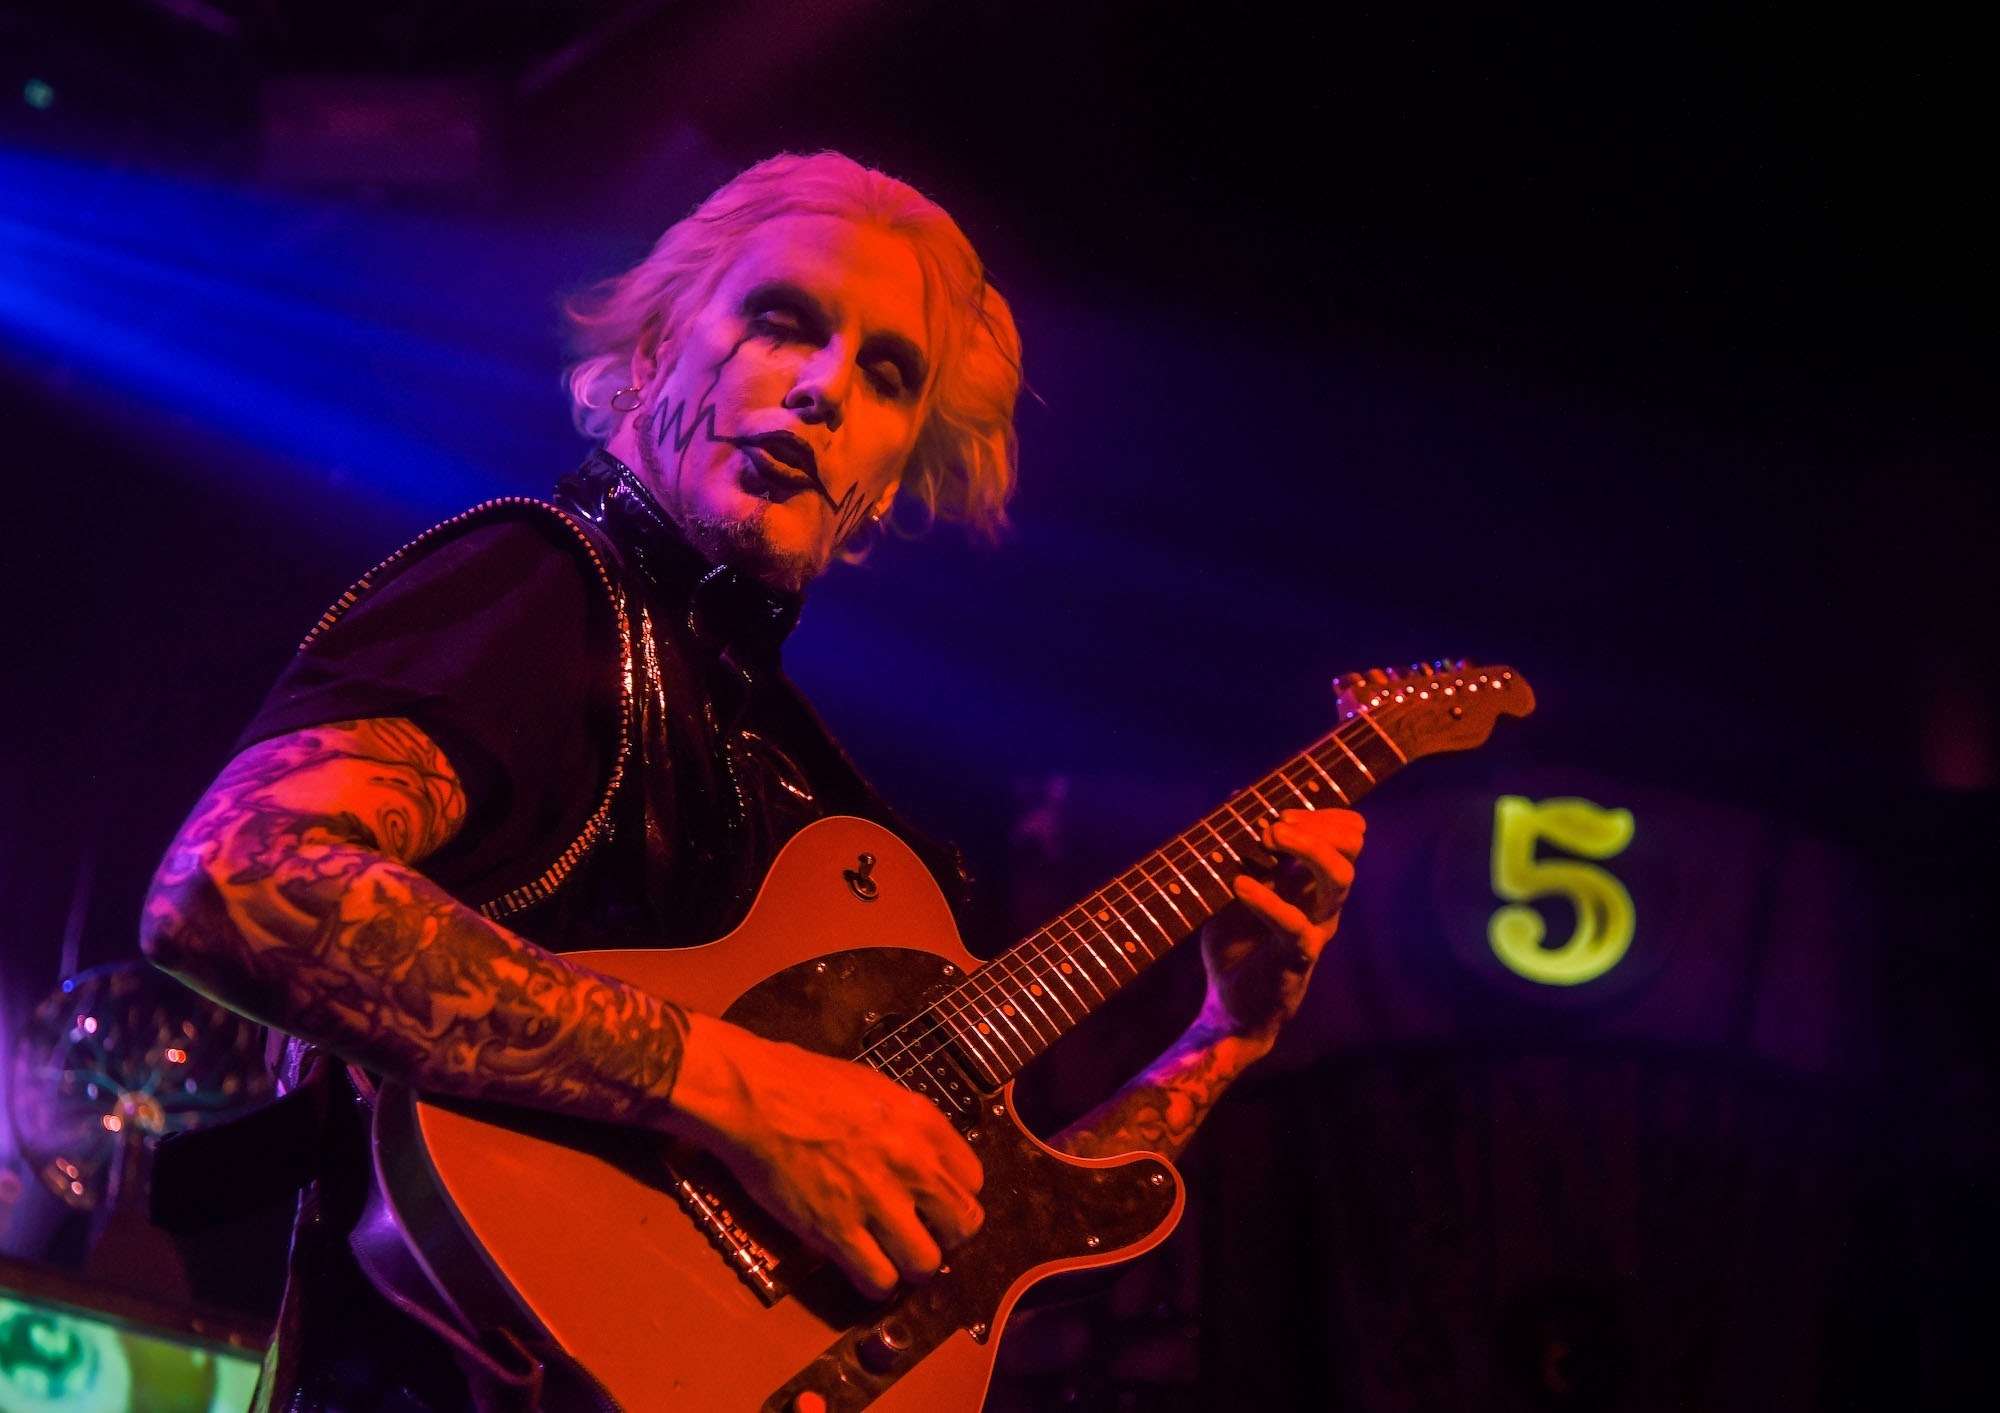 John 5 Live at The Forge [GALLERY] 8